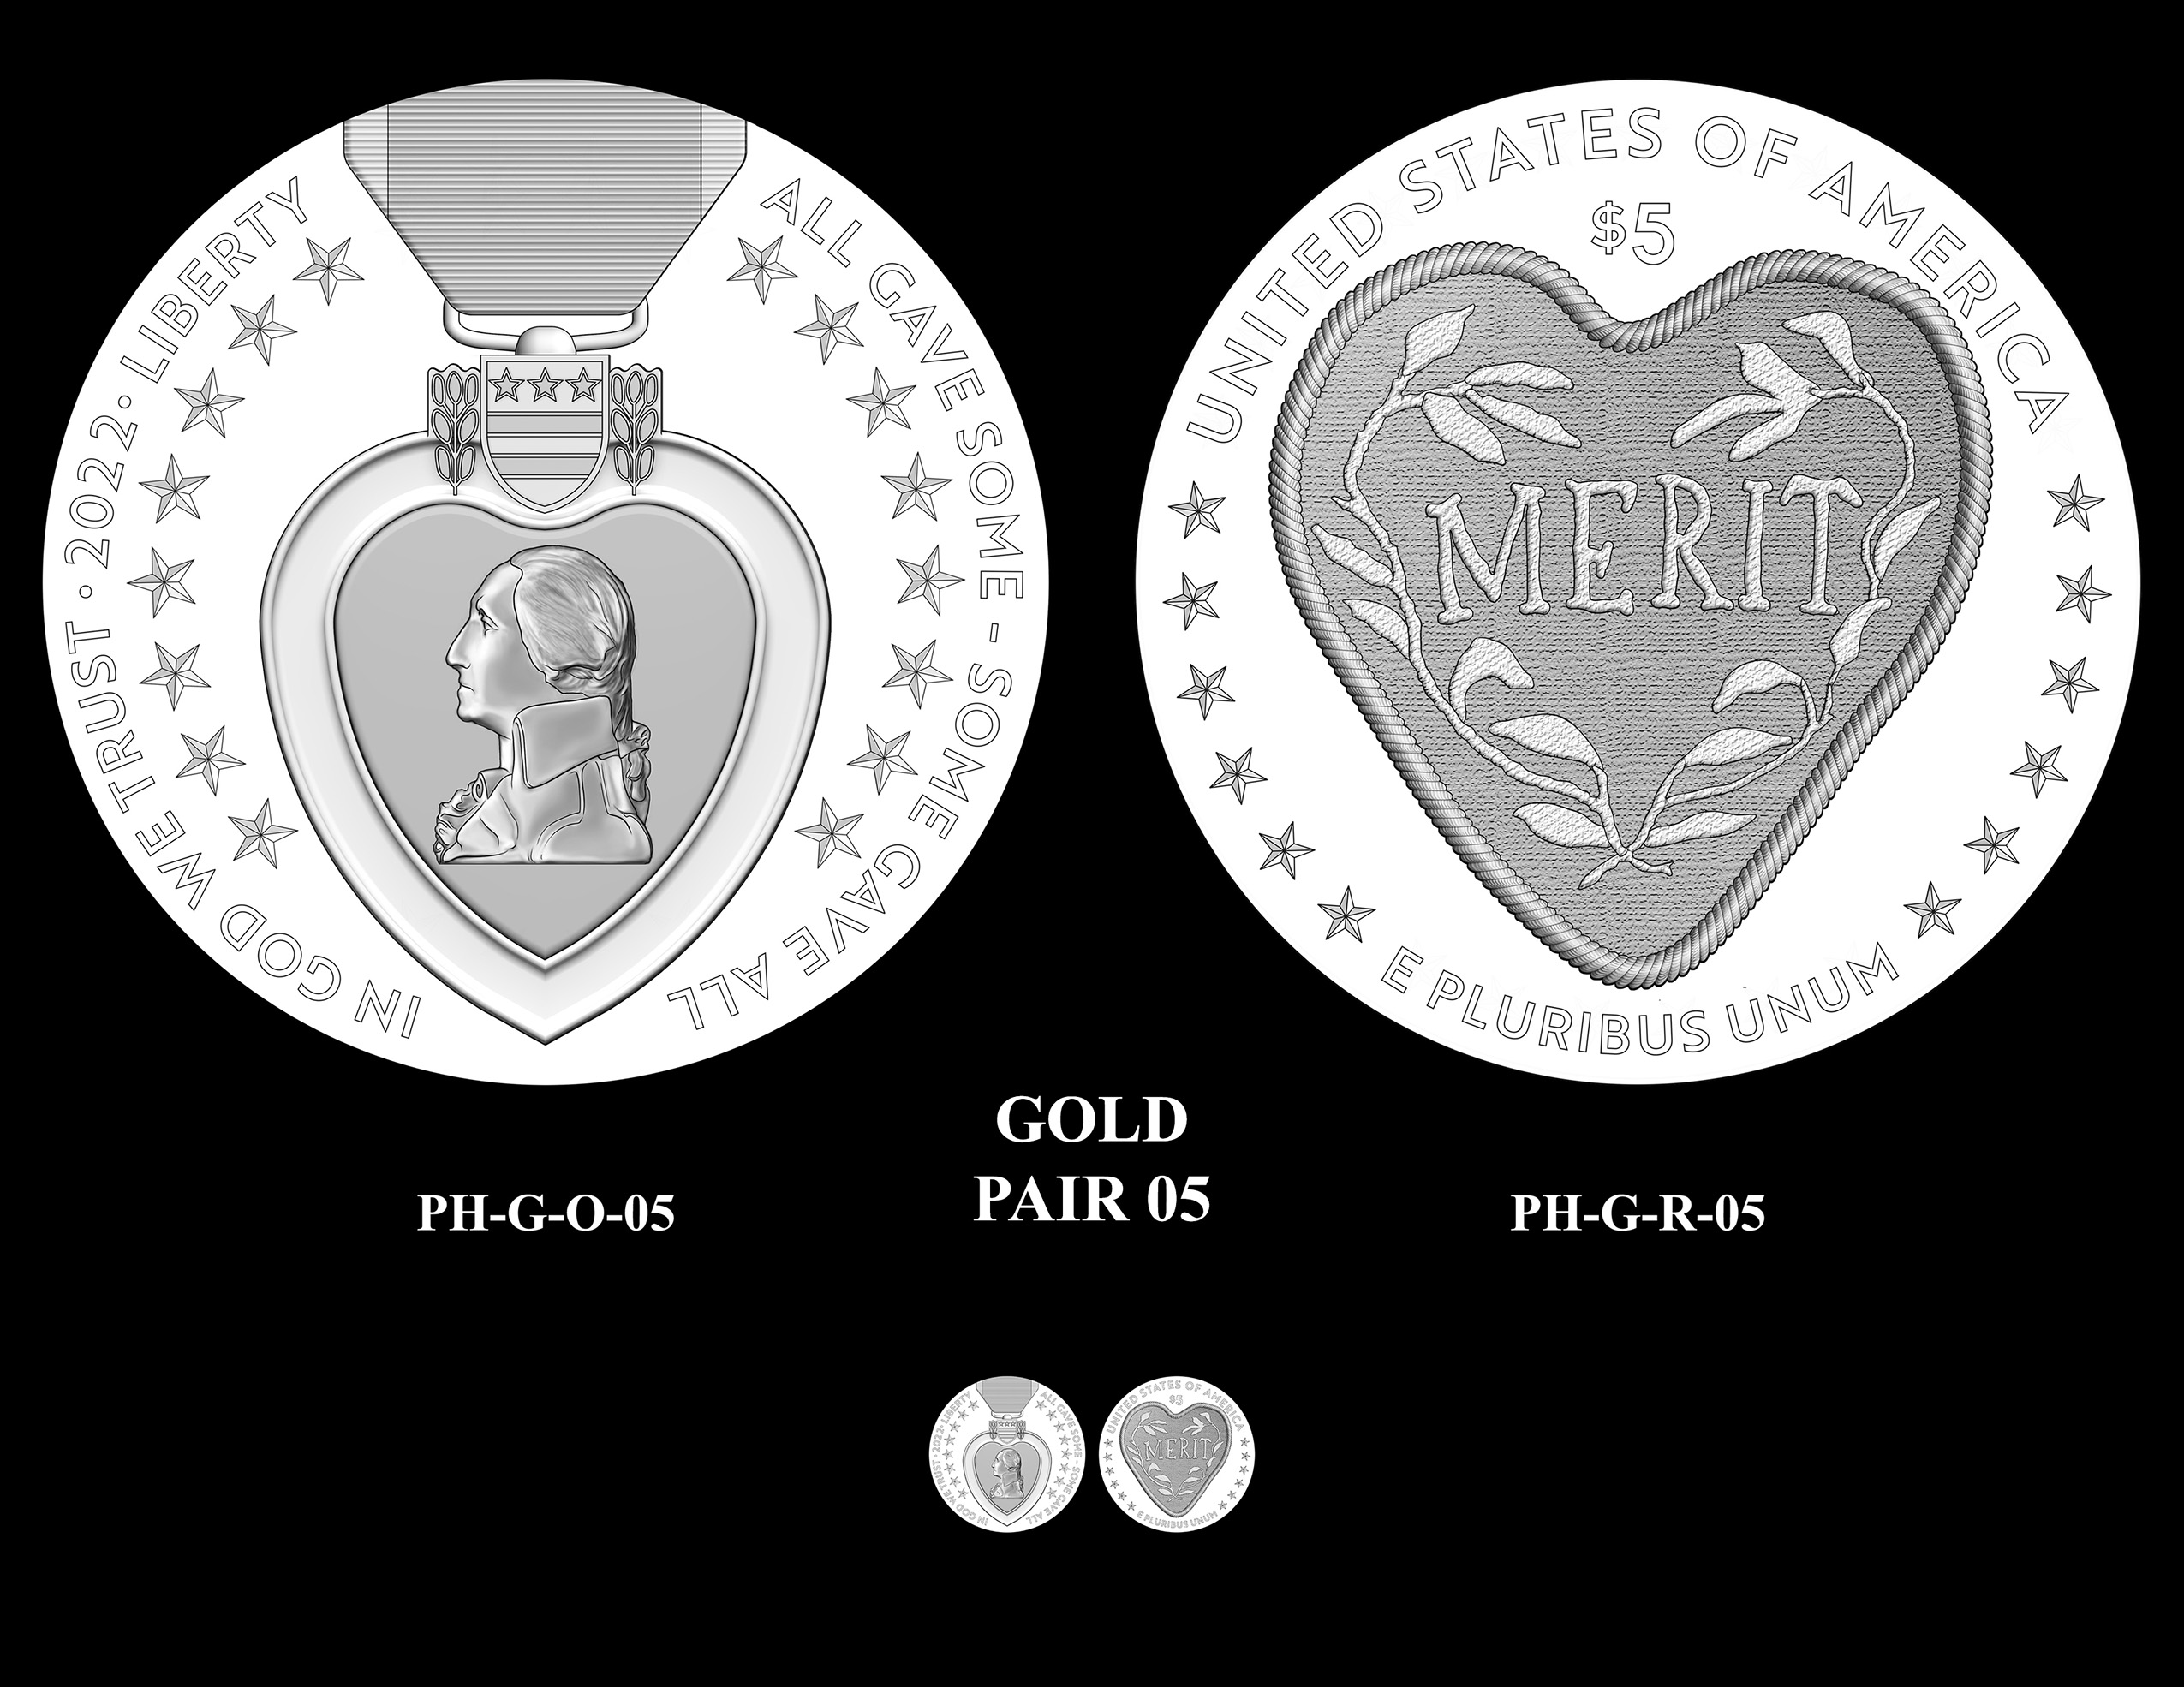 Gold Pair 05 -- National Purple Heart Hall of Honor Commemorative Coin Program